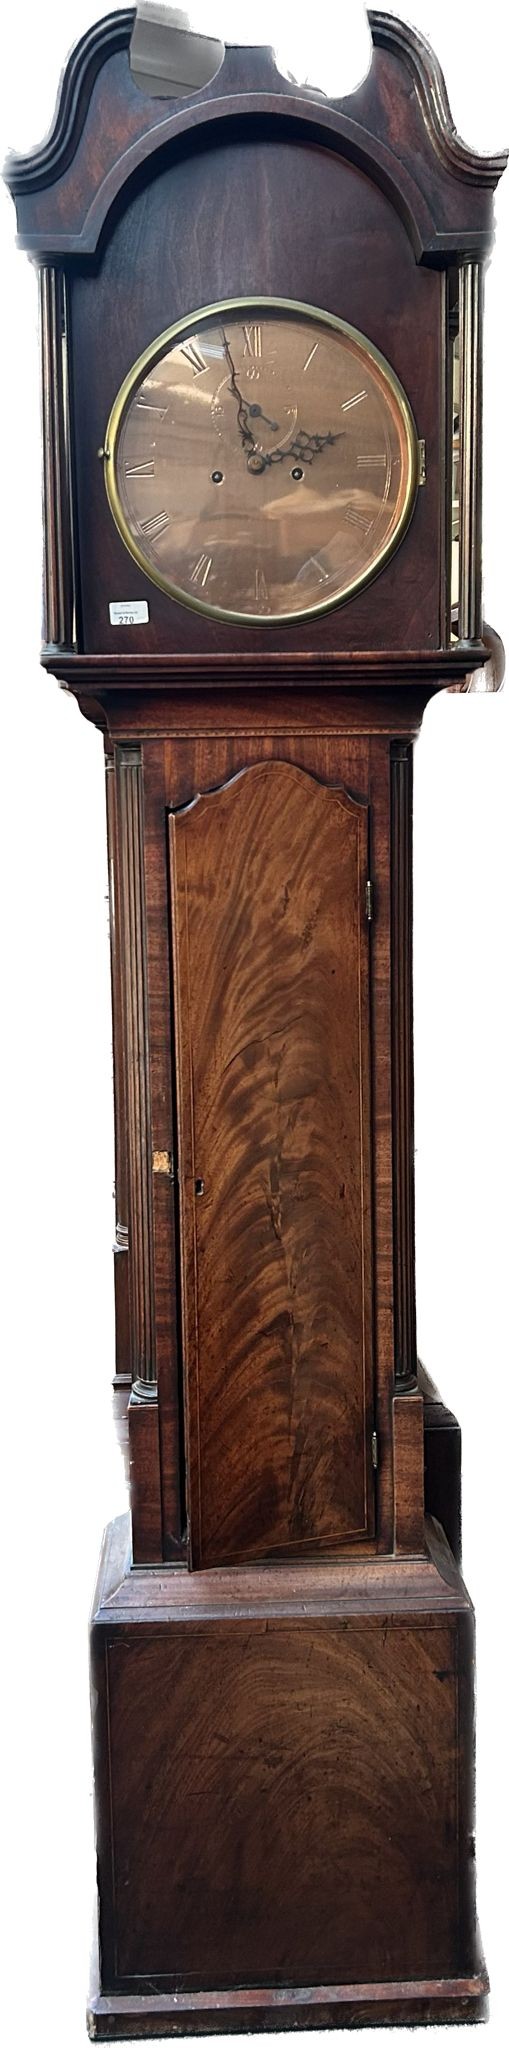 19th century Antique walnut and mahogany cased grandfather clock with circular brass face, has